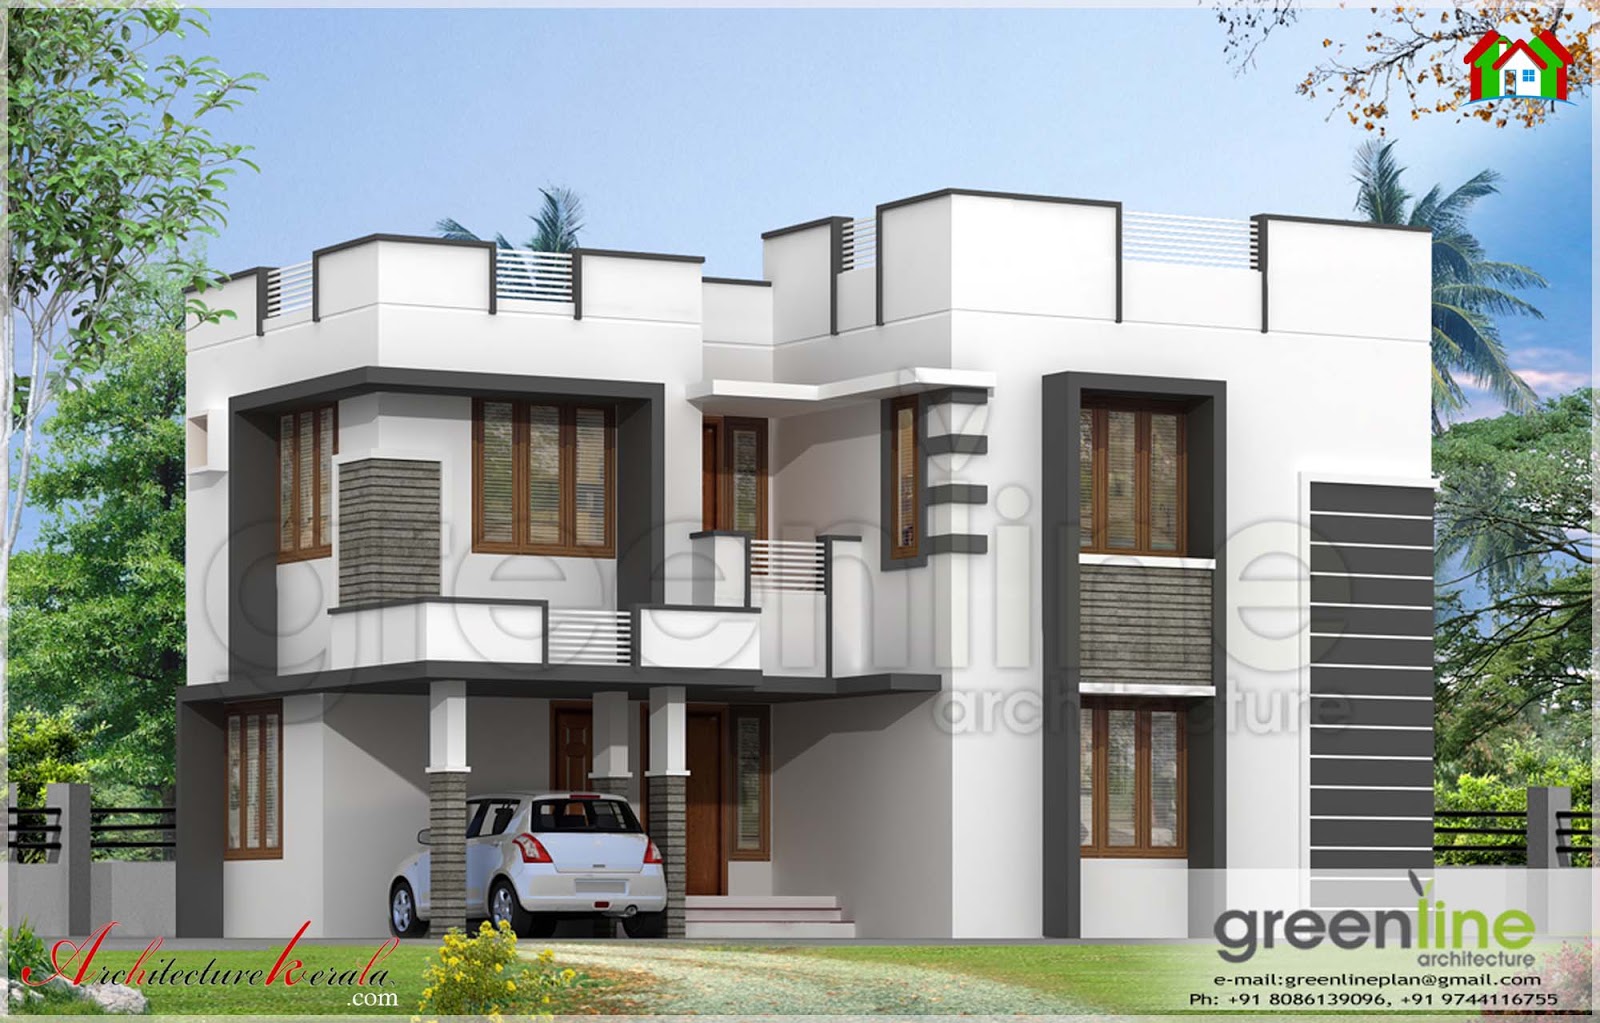  SIMPLE  HOUSE  ELEVATION  IN 1600 SQUARE FEET ARCHITECTURE 